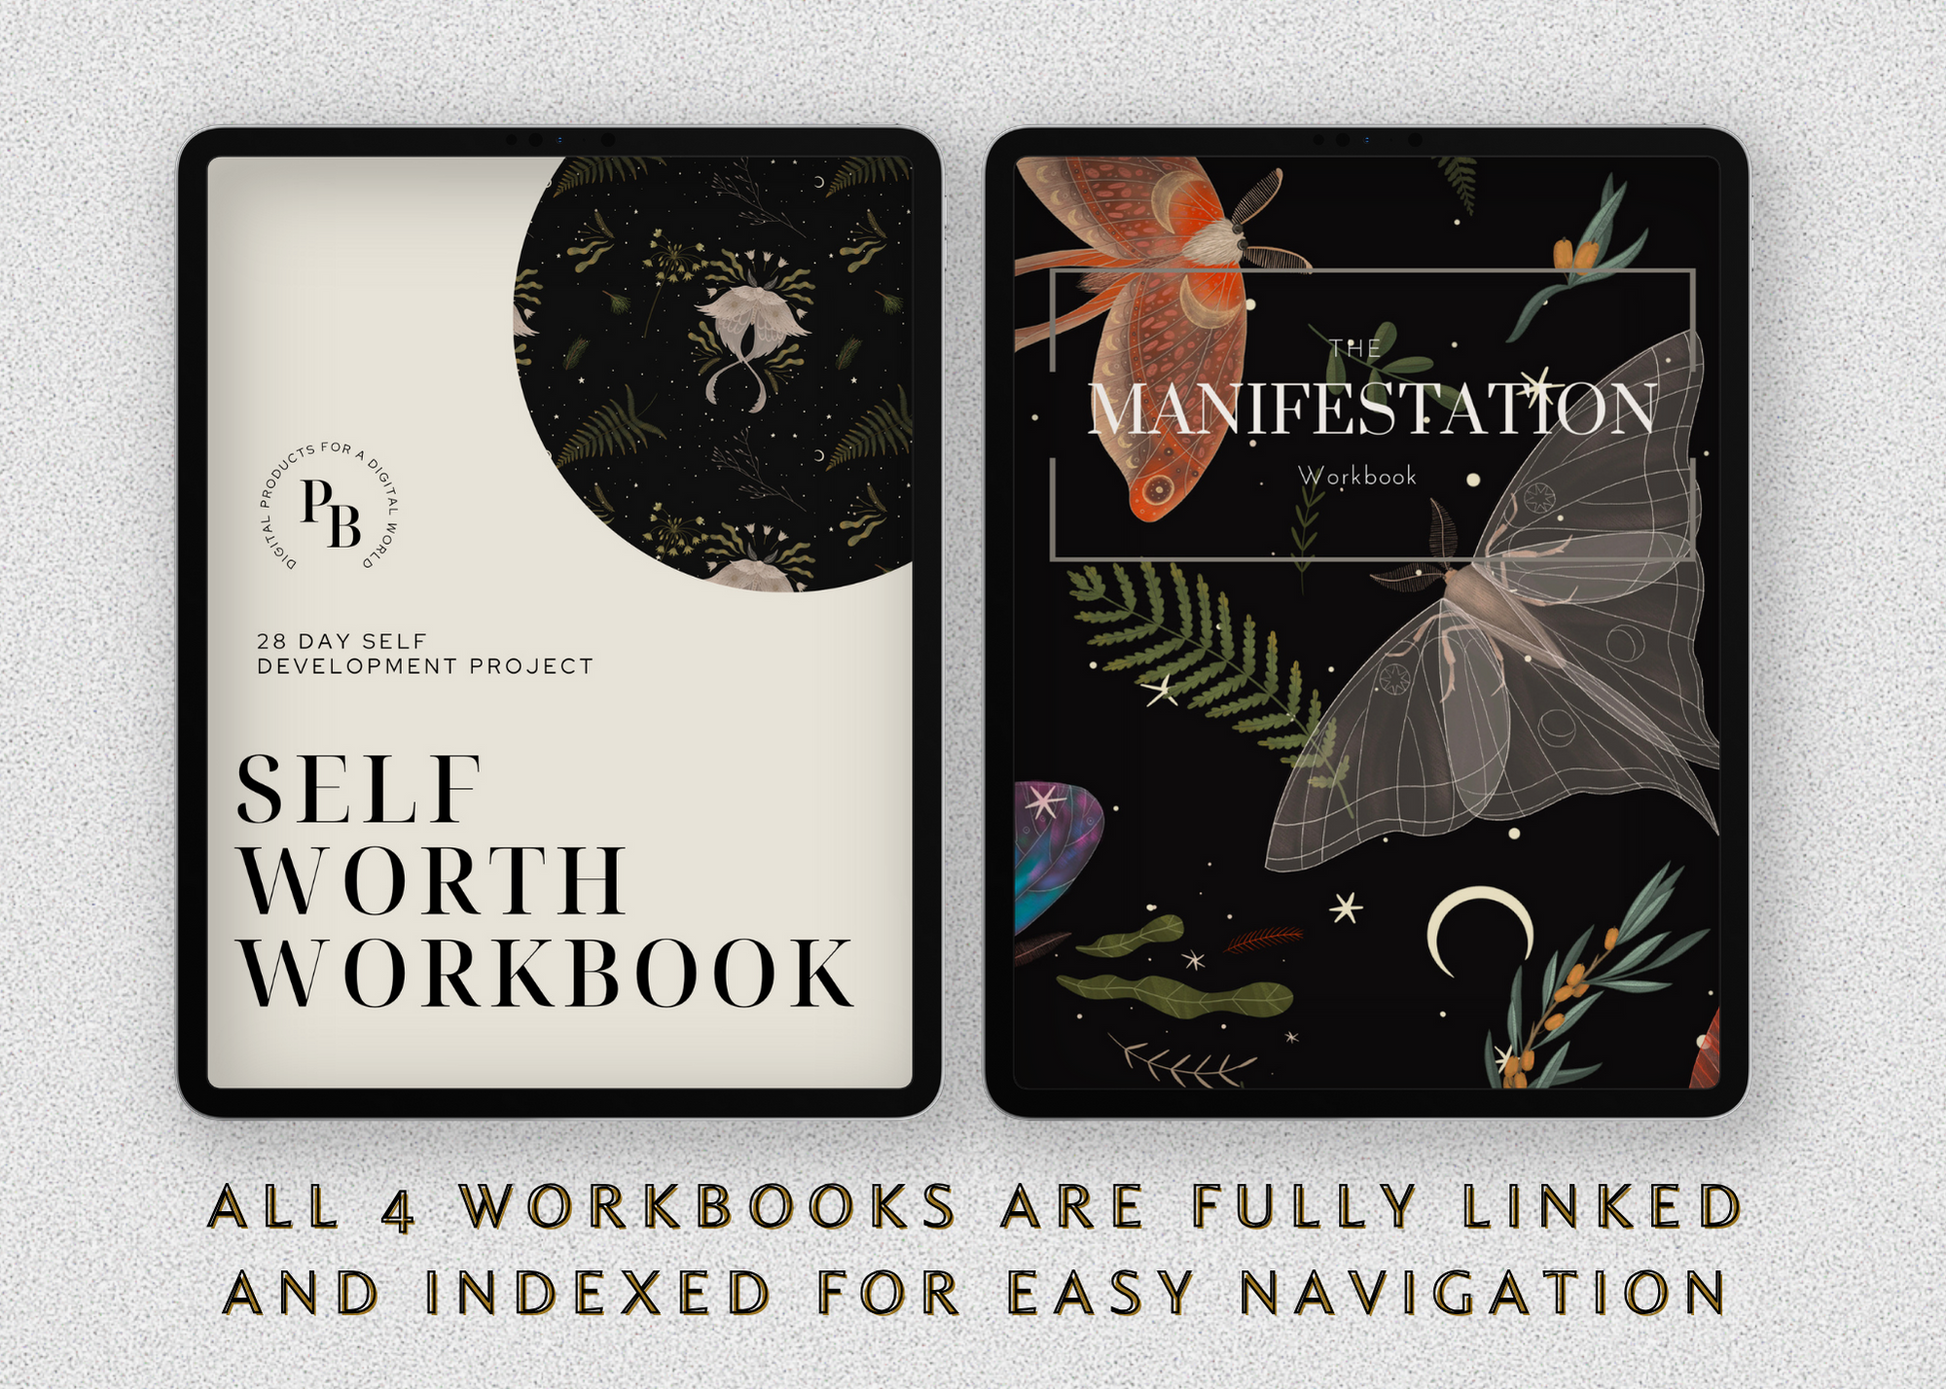 Digital Planners For Goodnotes-Digital Workbook Package- Goodnotes Digital Workbooks For Self Development And Self Therapy-Trauma Healing, Manifestation, Shadow Work, And Self Worth Digital Workbooks